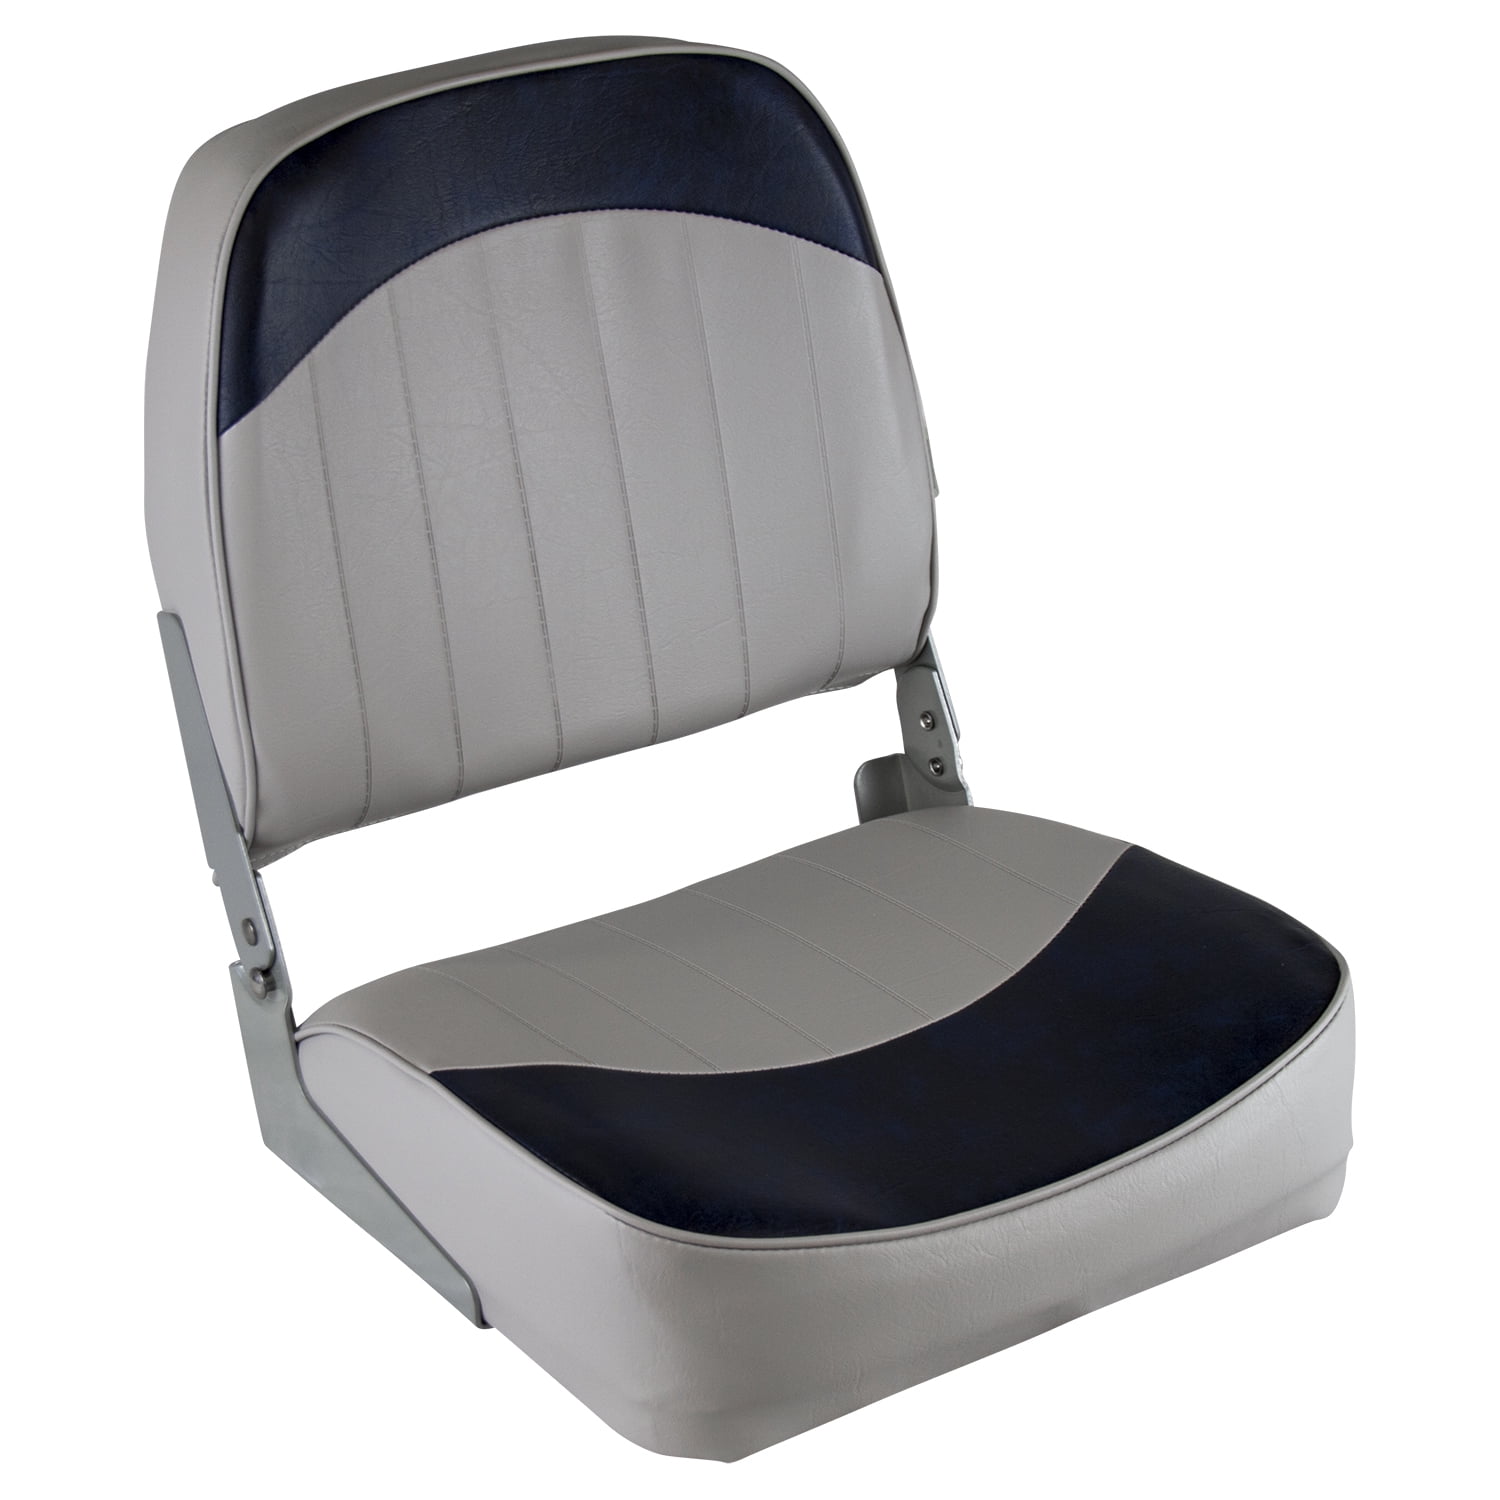 Wise Low Back Boat Seat, Grey/Charcoal